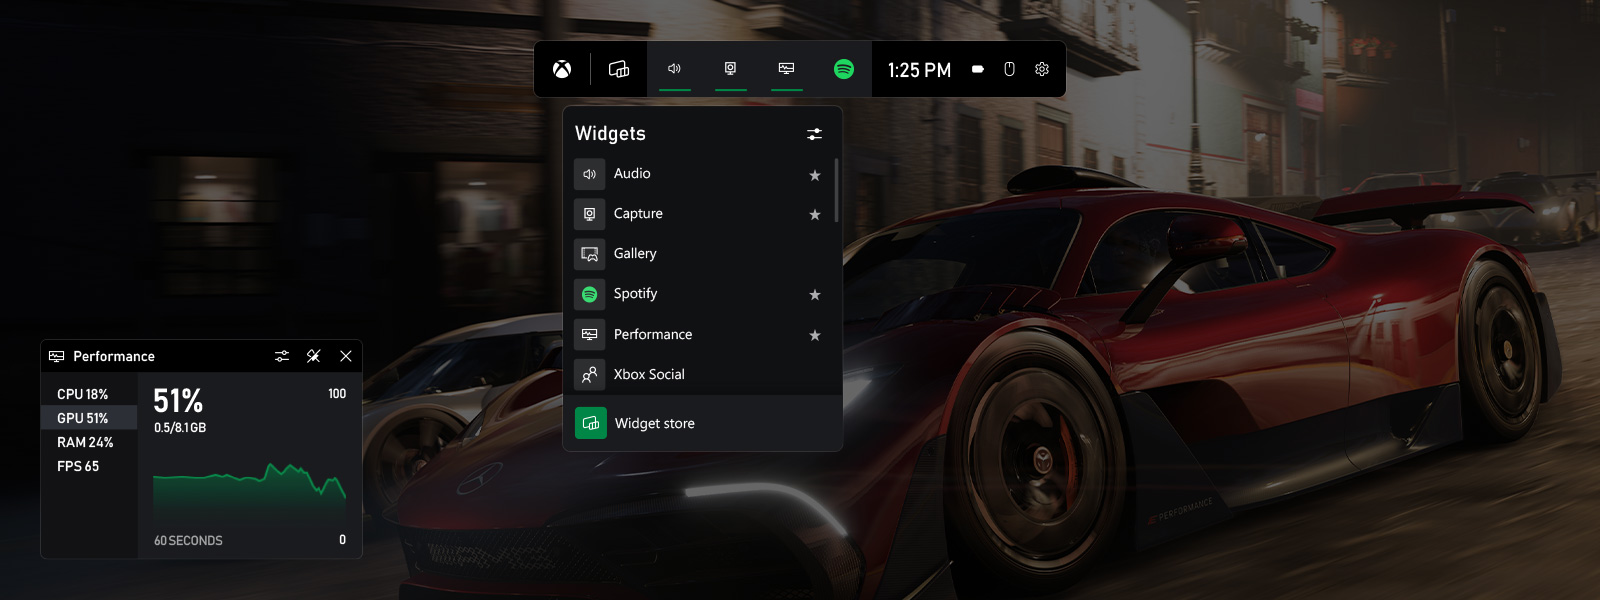 Screenshot of the resources tool on the Xbox Dash